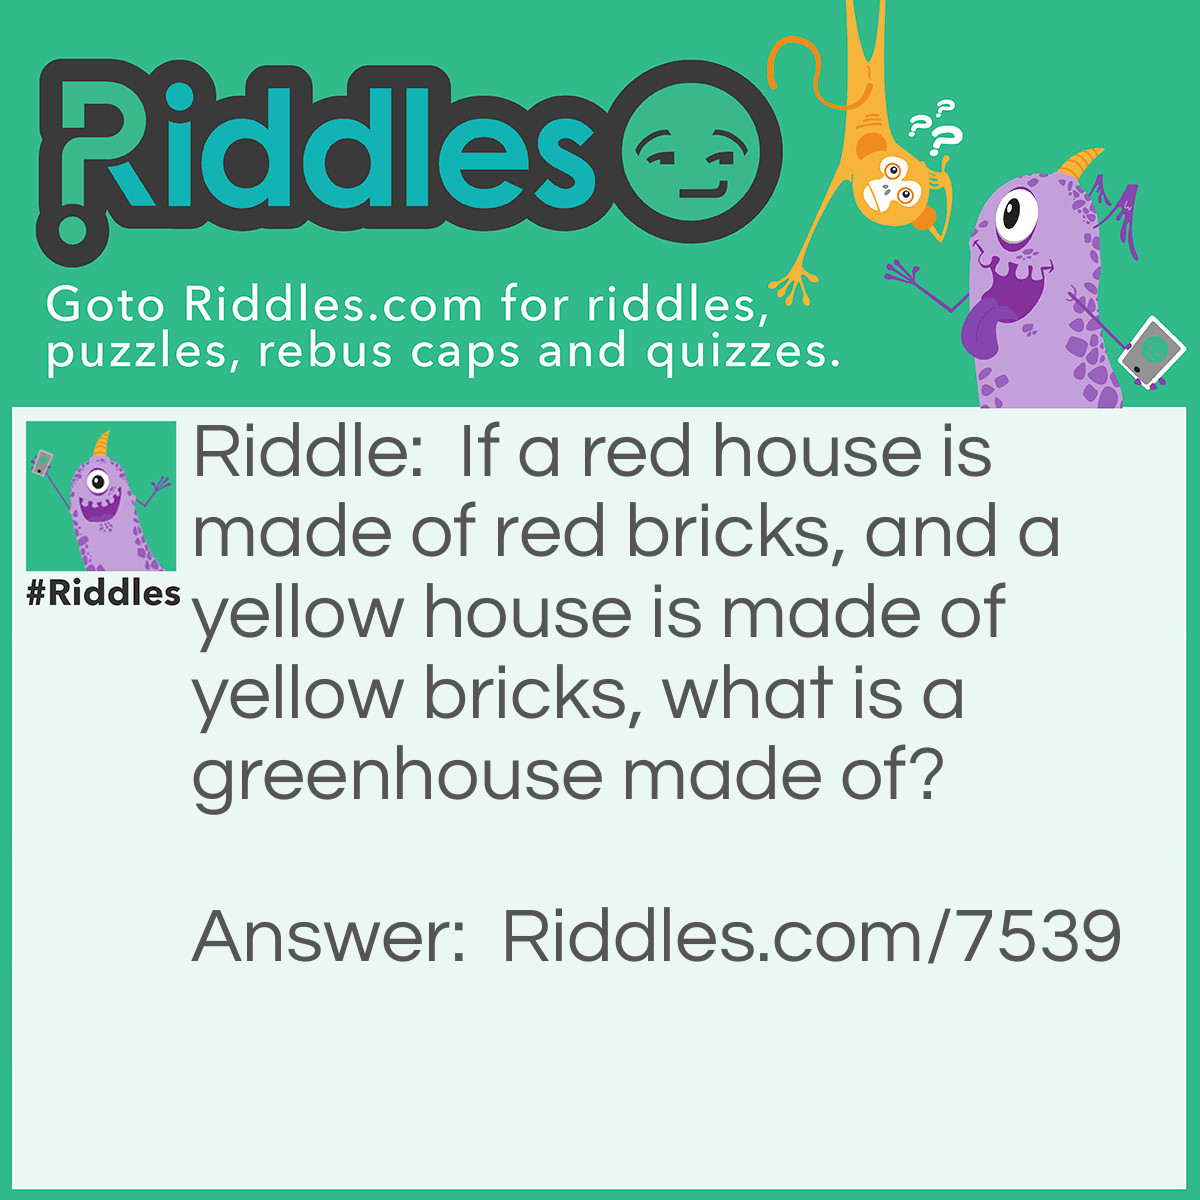 Riddle: If a red house is made of red bricks, and a yellow house is made of yellow bricks, what is a greenhouse made of? Answer: Glass.